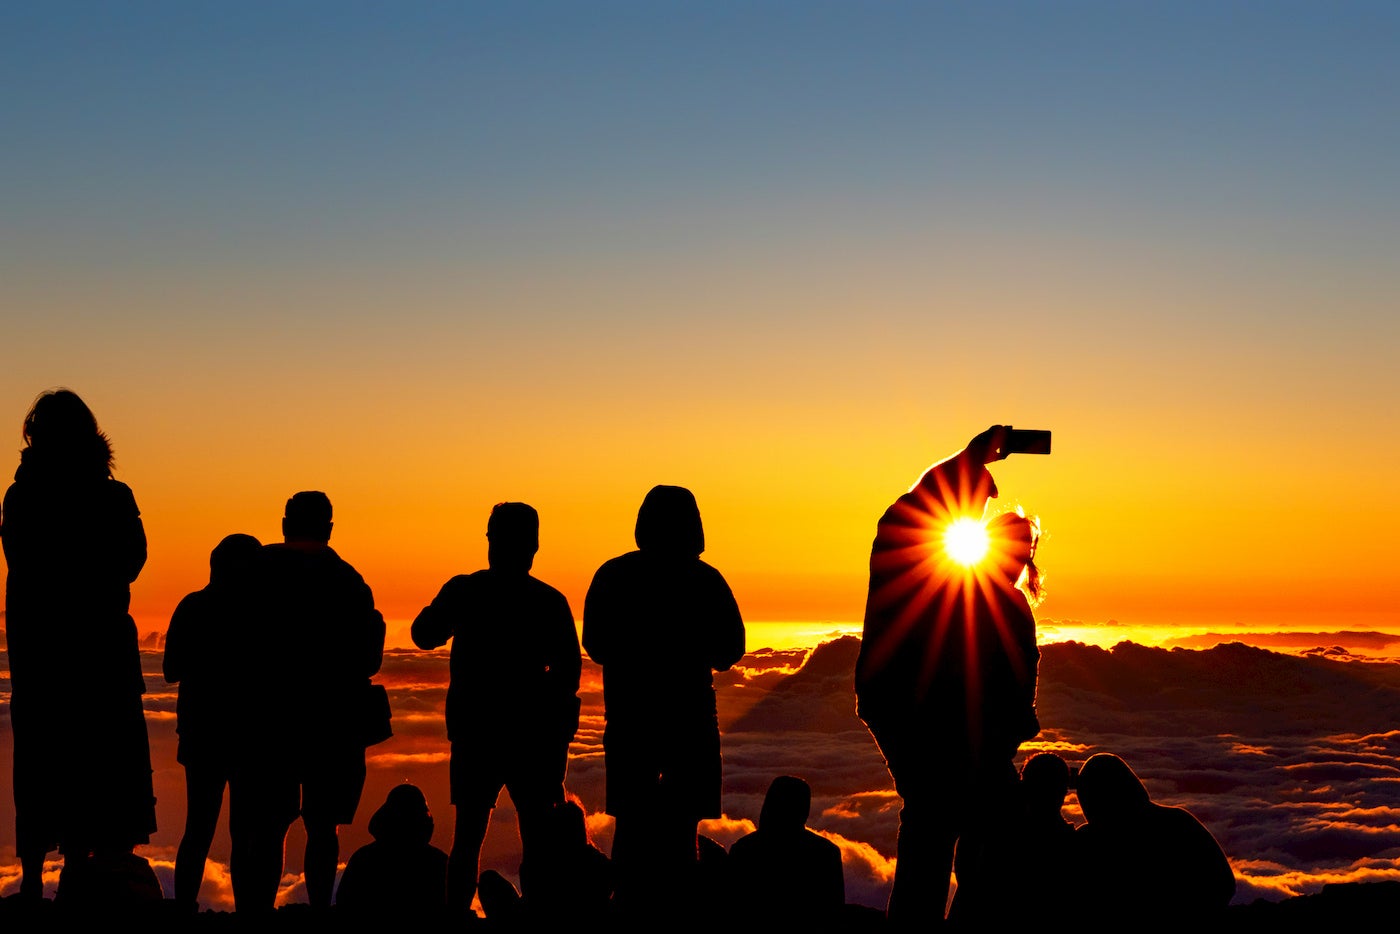 Group of people watching the sunset above the clouds on mountain.